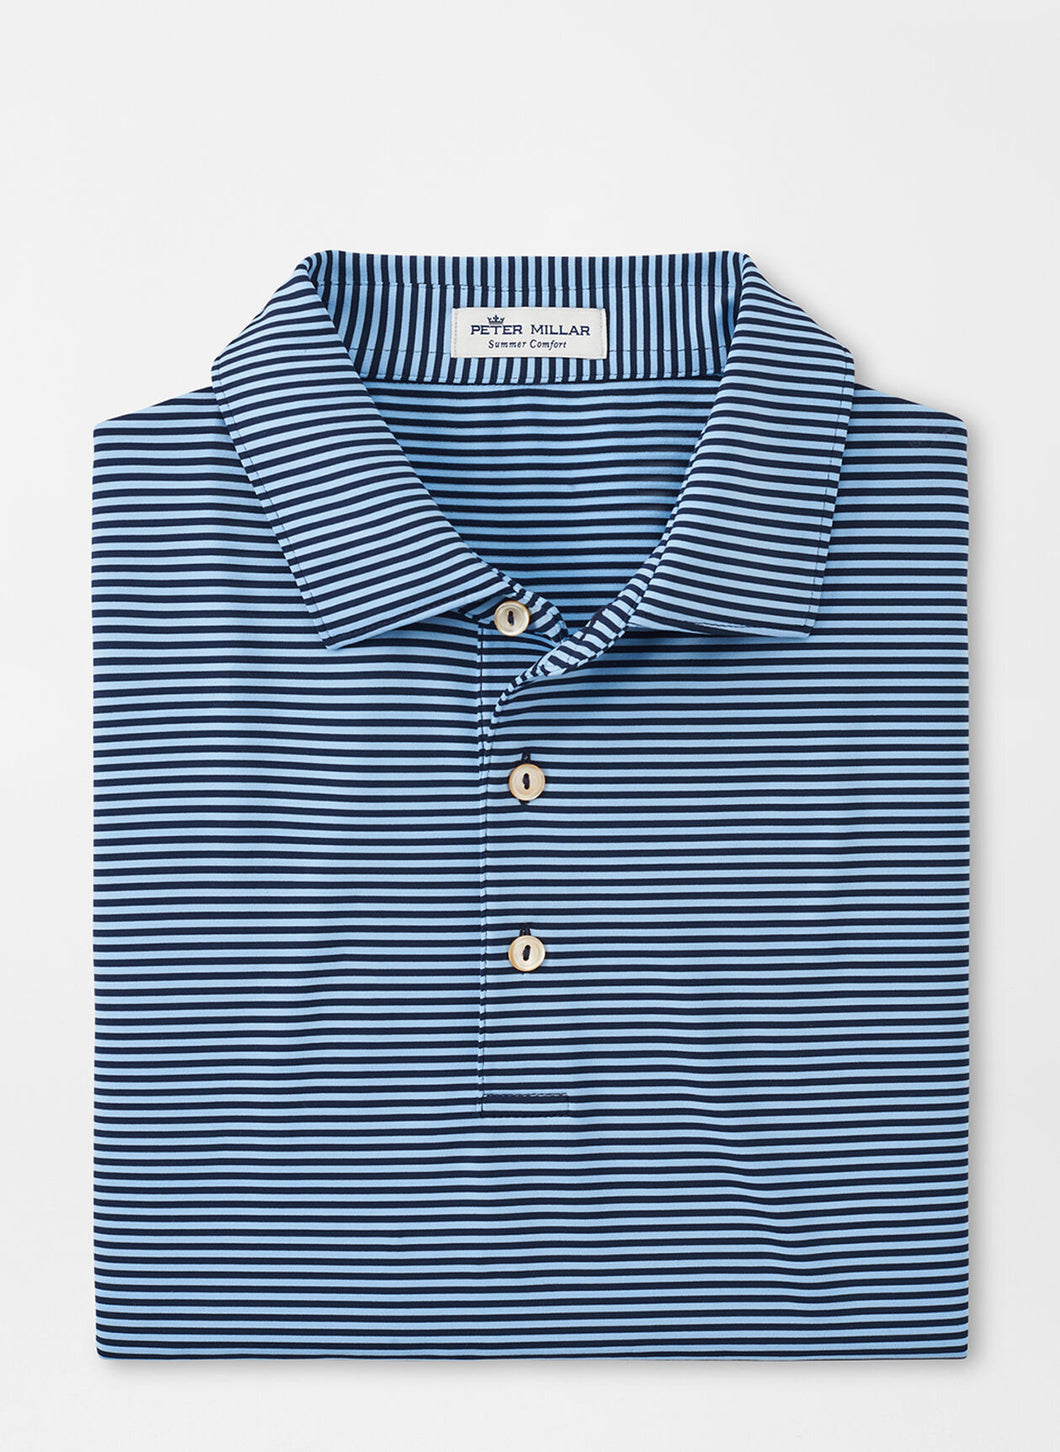 Peter Millar Hales Performance Jersey Polo in Navy/Cottage Blue